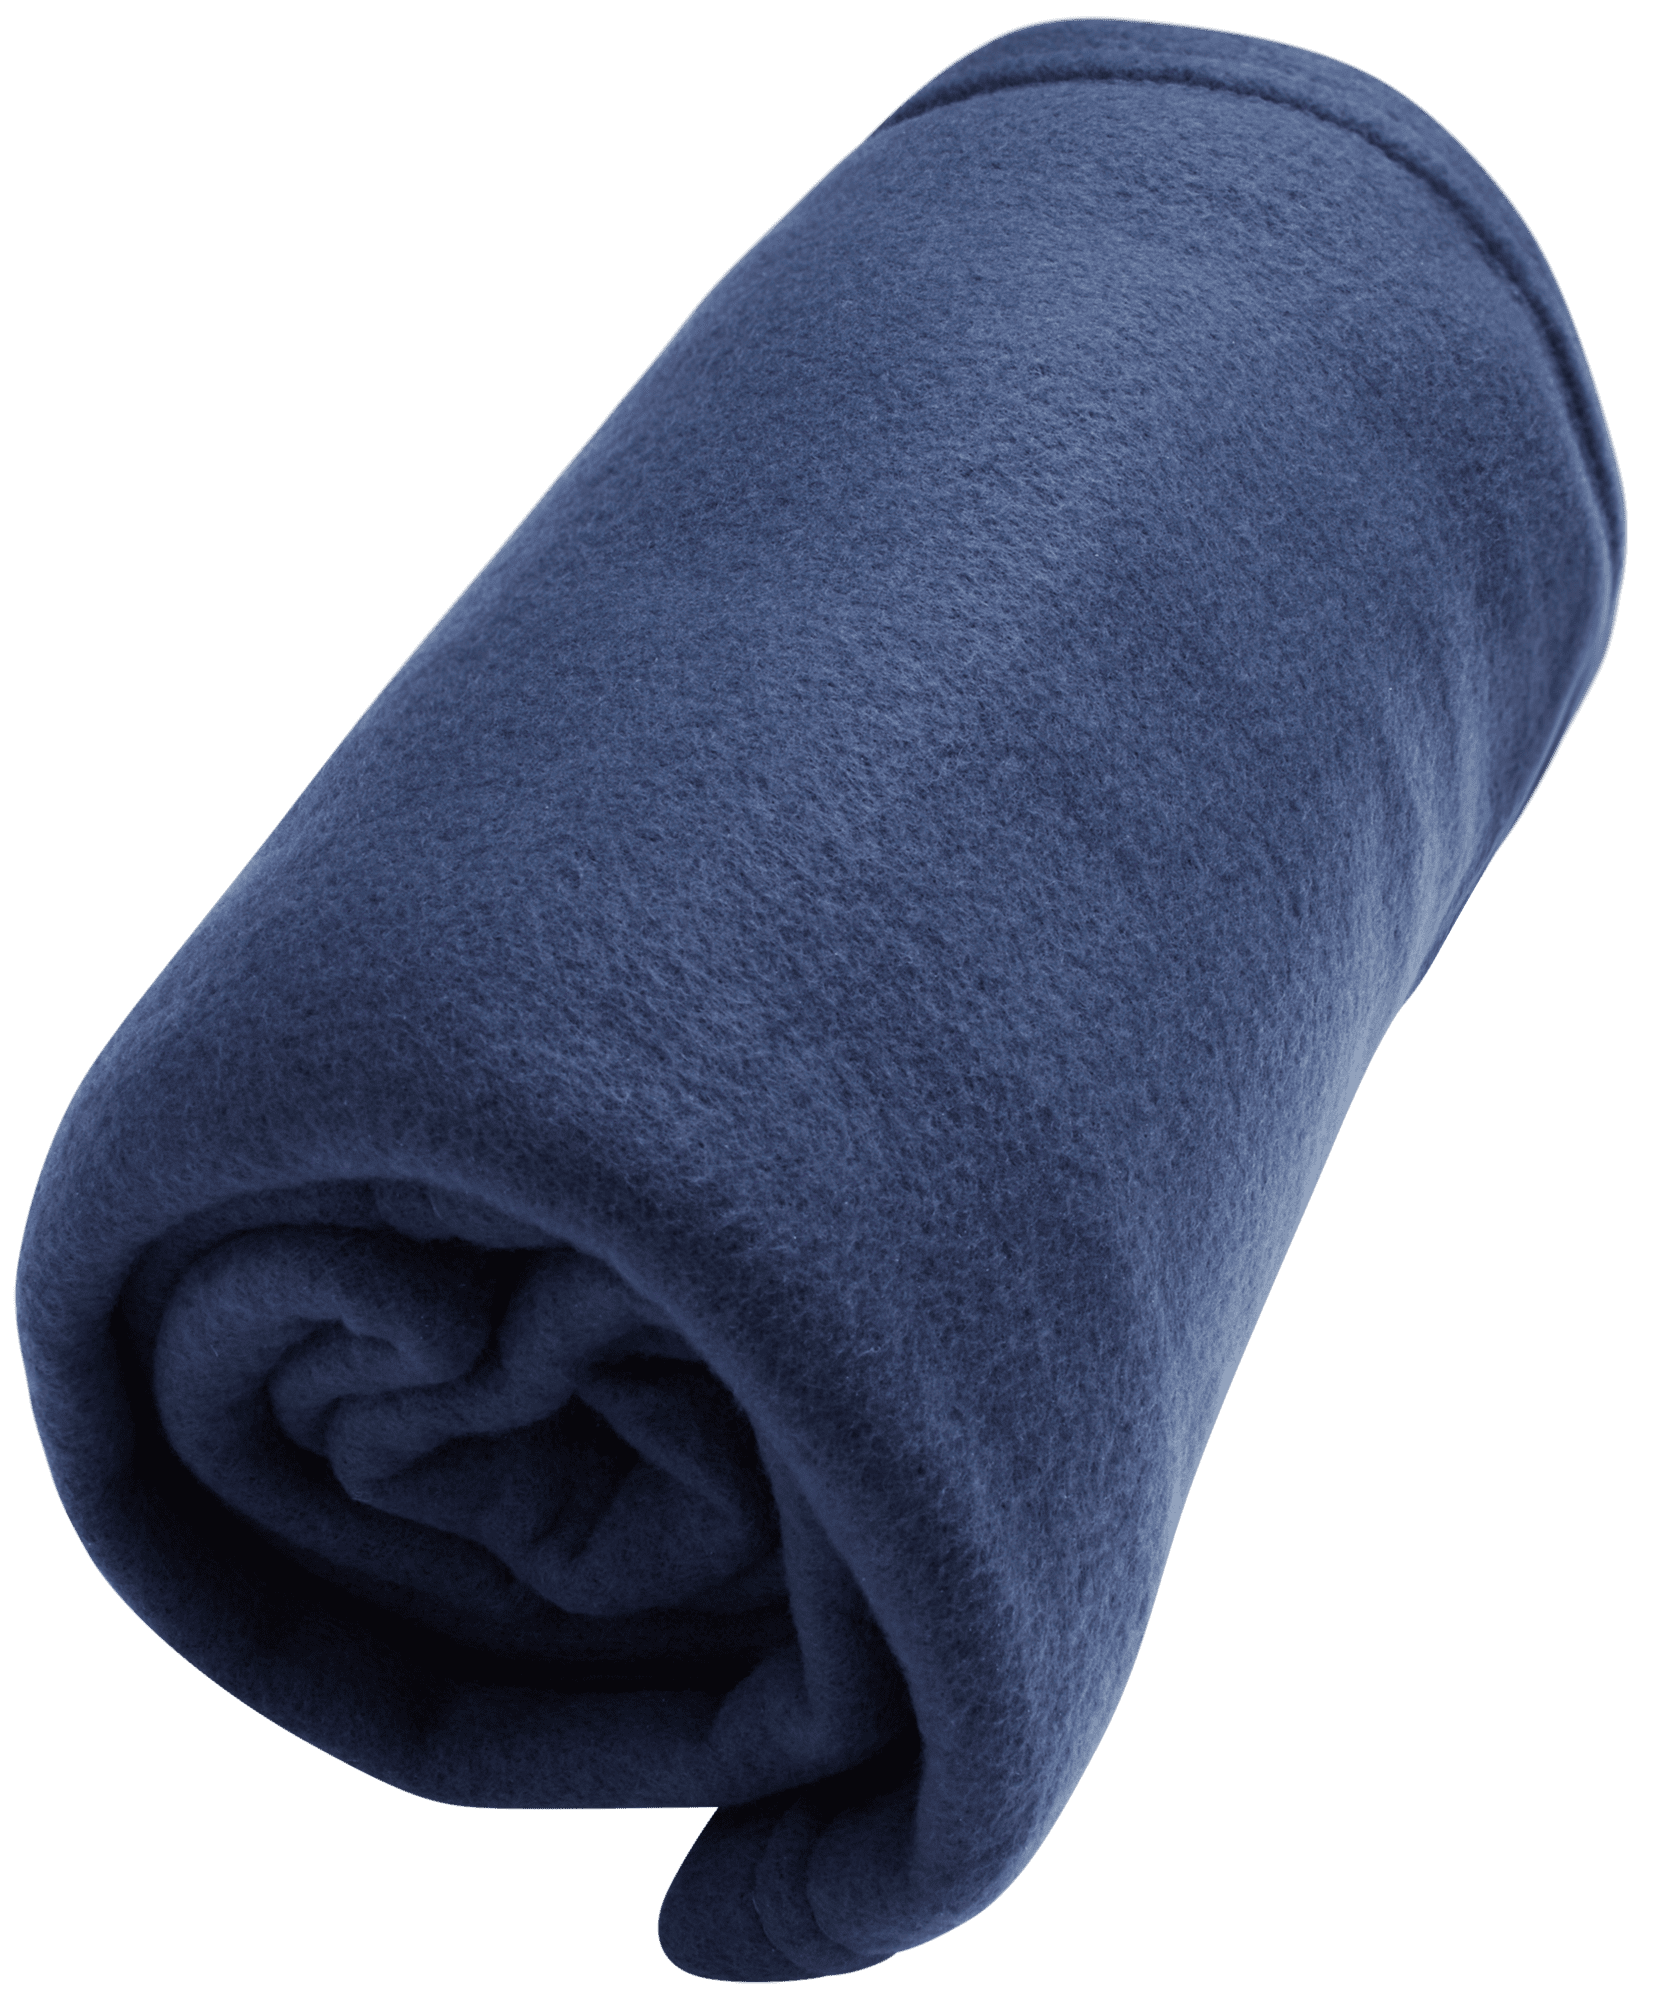 Brookstone Travel Blanket with Foot Pocket and Packing Case - Lightweight  Portable Fleece Blanket for Vacations, Airplanes, Trains, Buses, and Cars